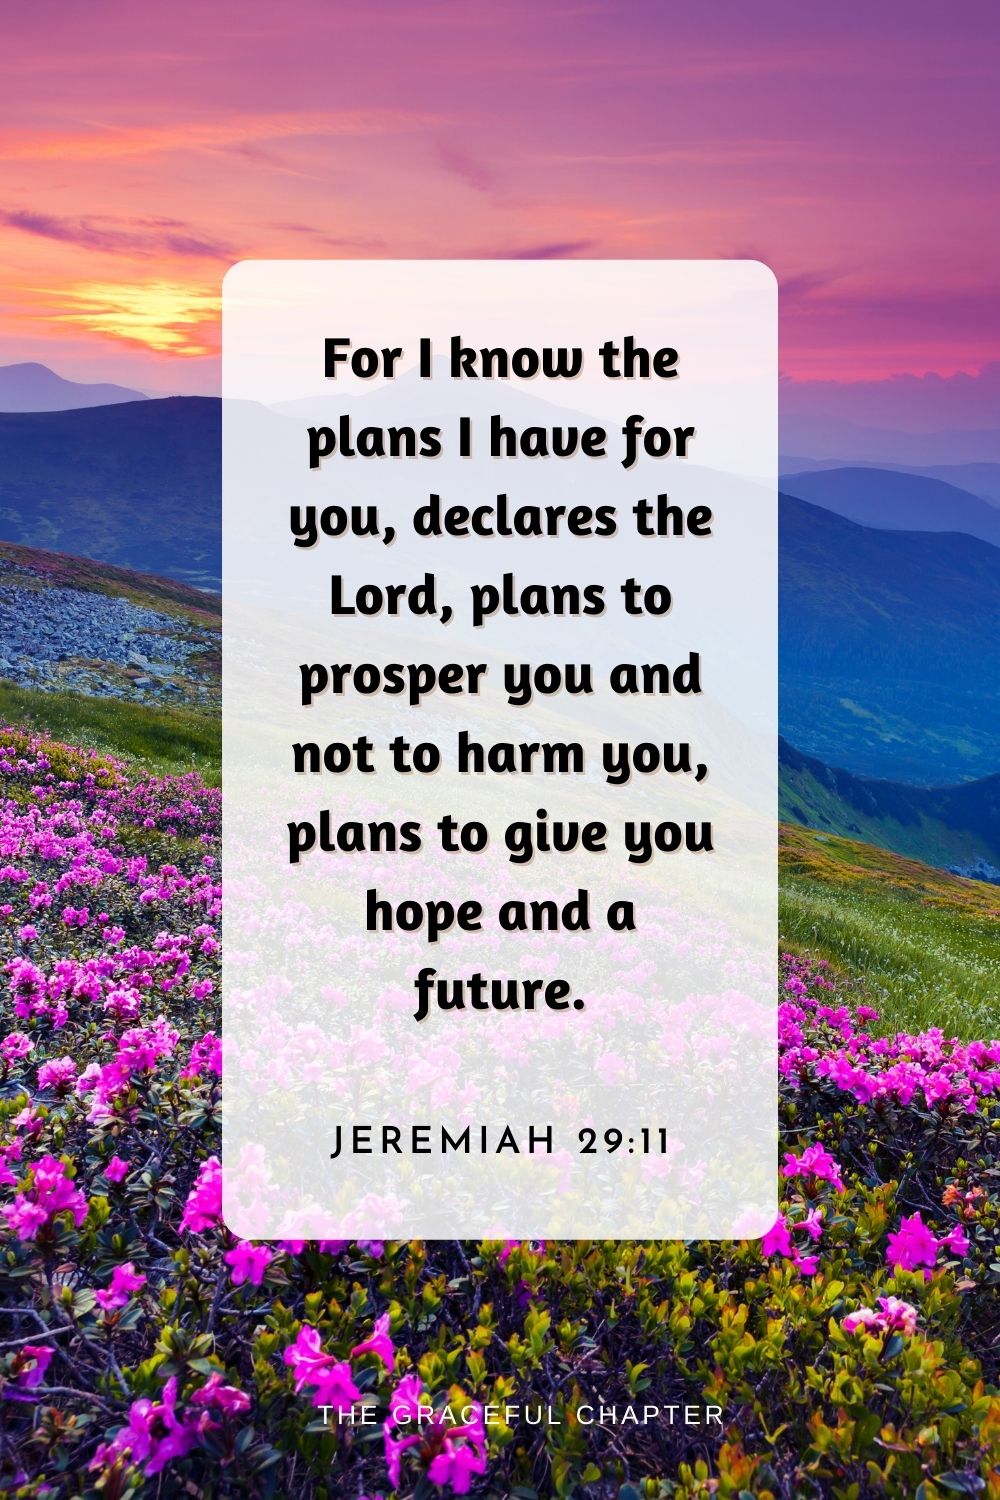 For I know the plans I have for you, declares the Lord, plans to prosper you and not to harm you, plans to give you hope and a future.